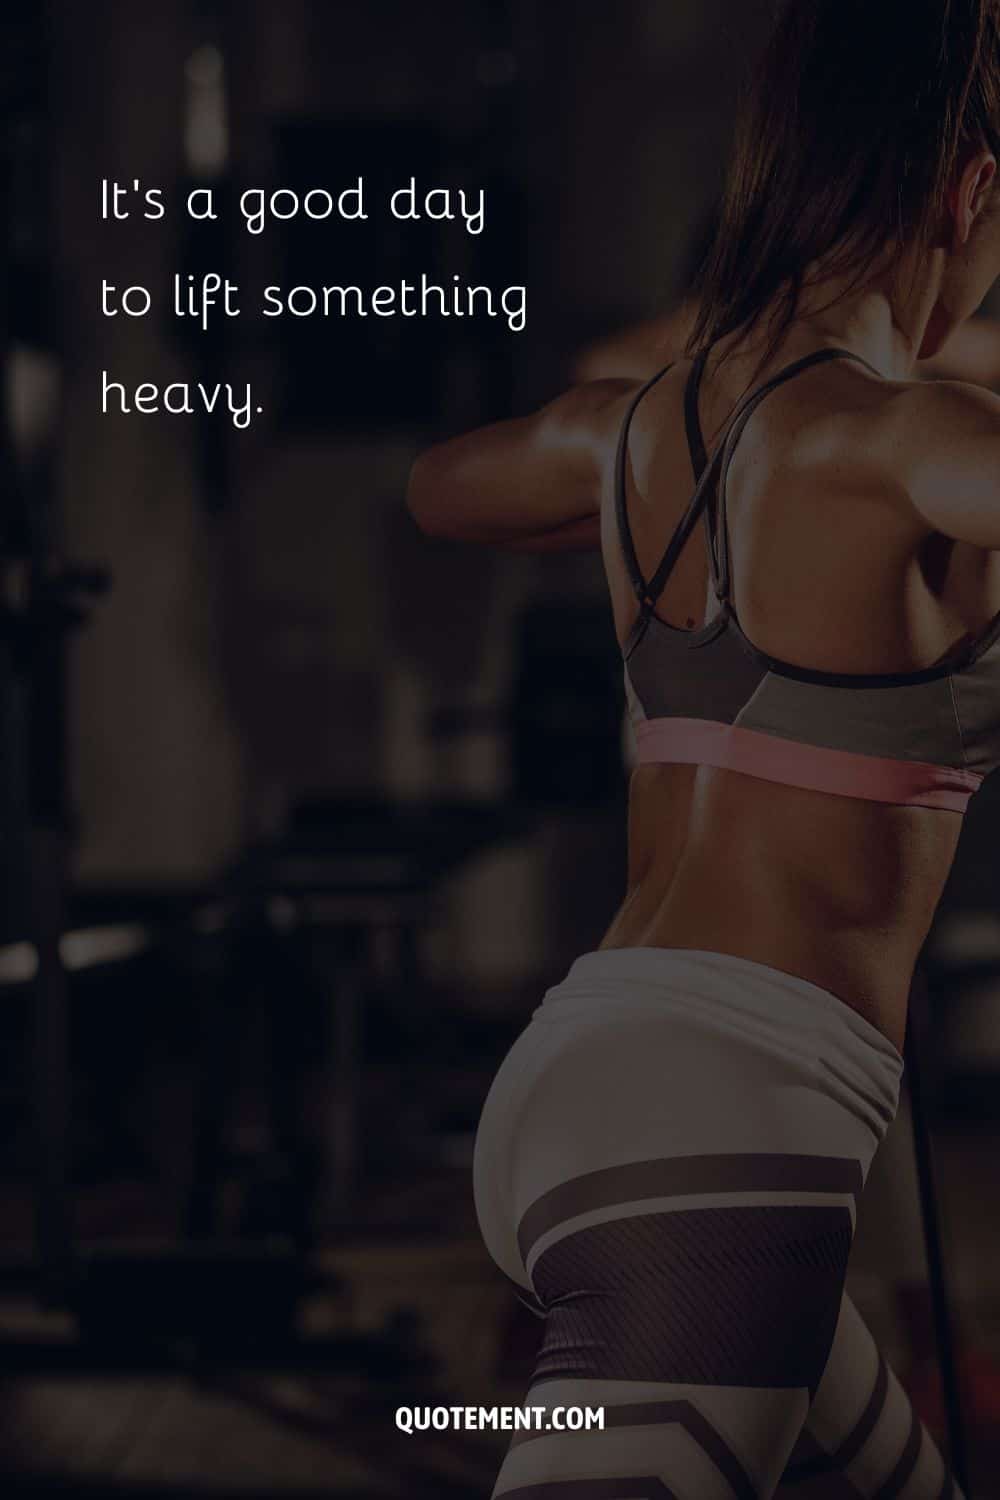 fit girl image representing weightlifting quote